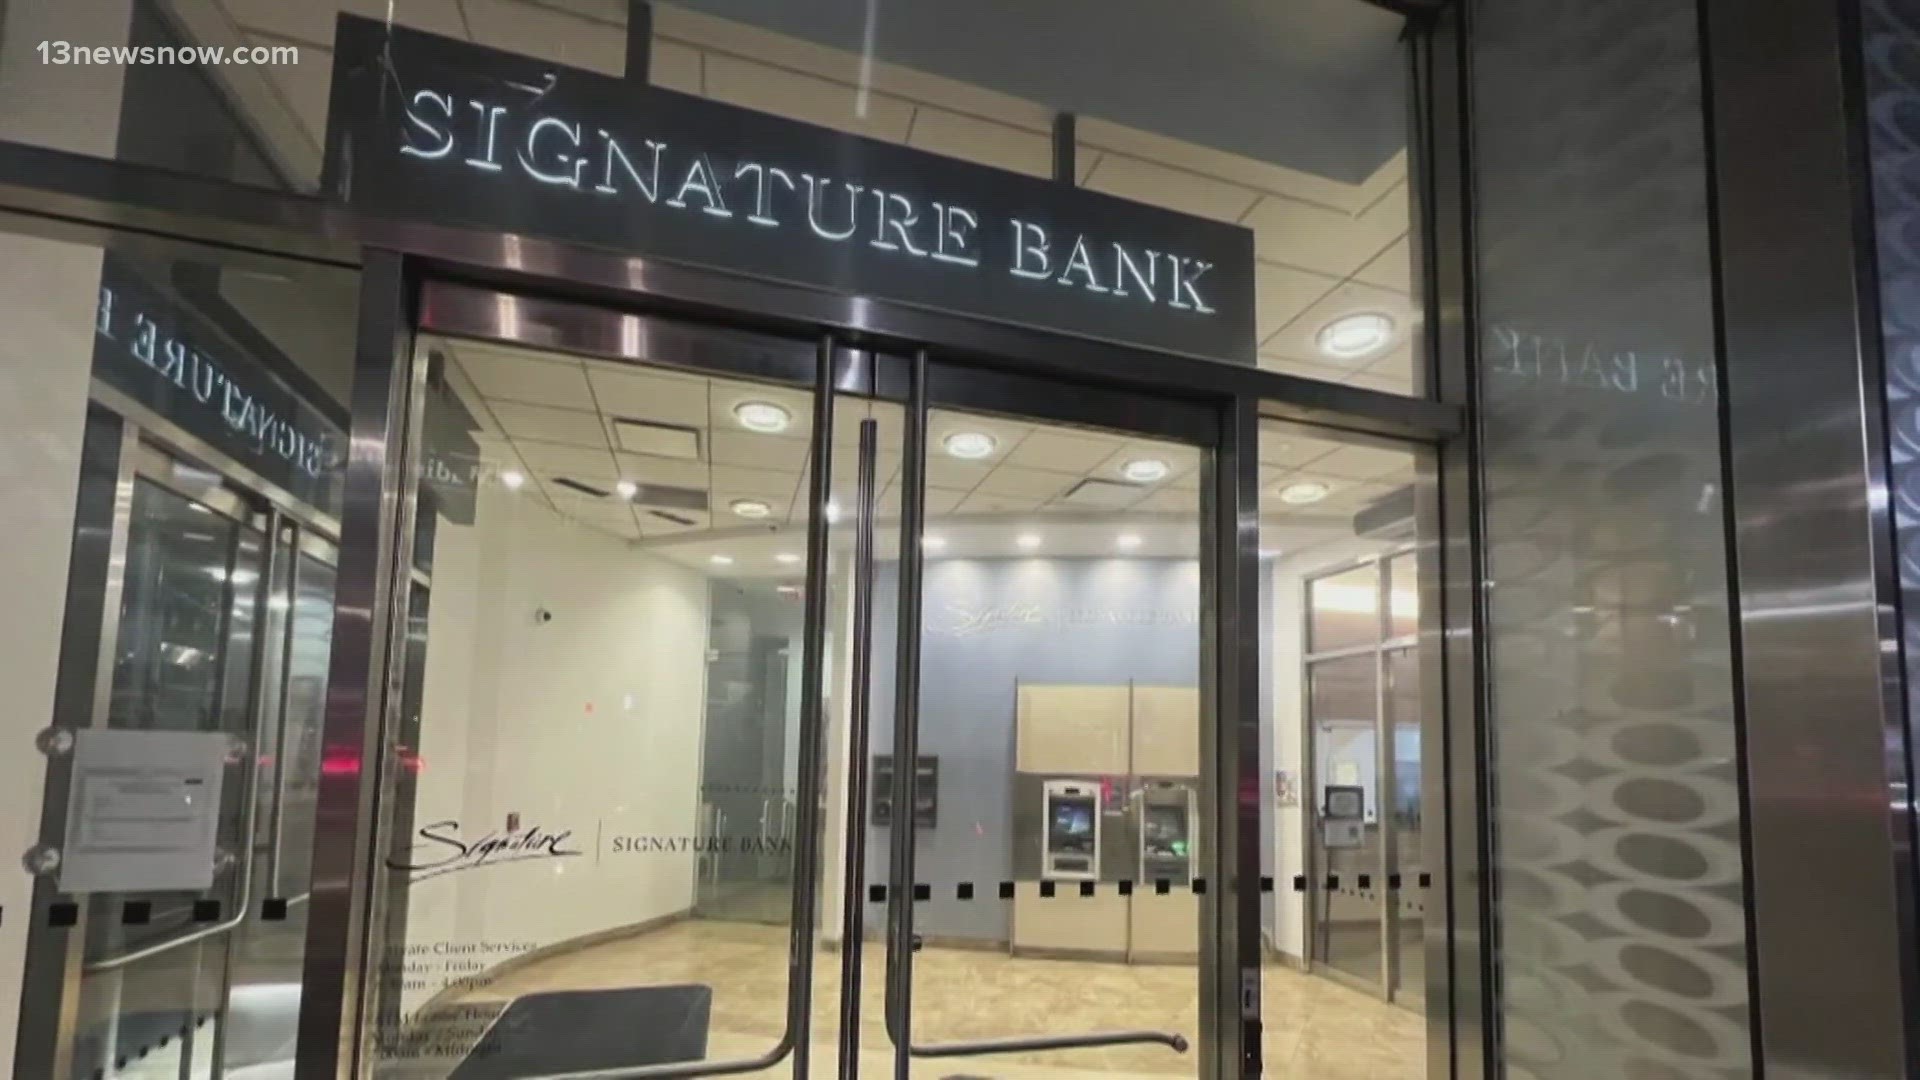 The deal will include the purchase of $38.4 billion in Signature Bank’s assets, a little more than one-third of Signature's total when the bank failed a week ago.